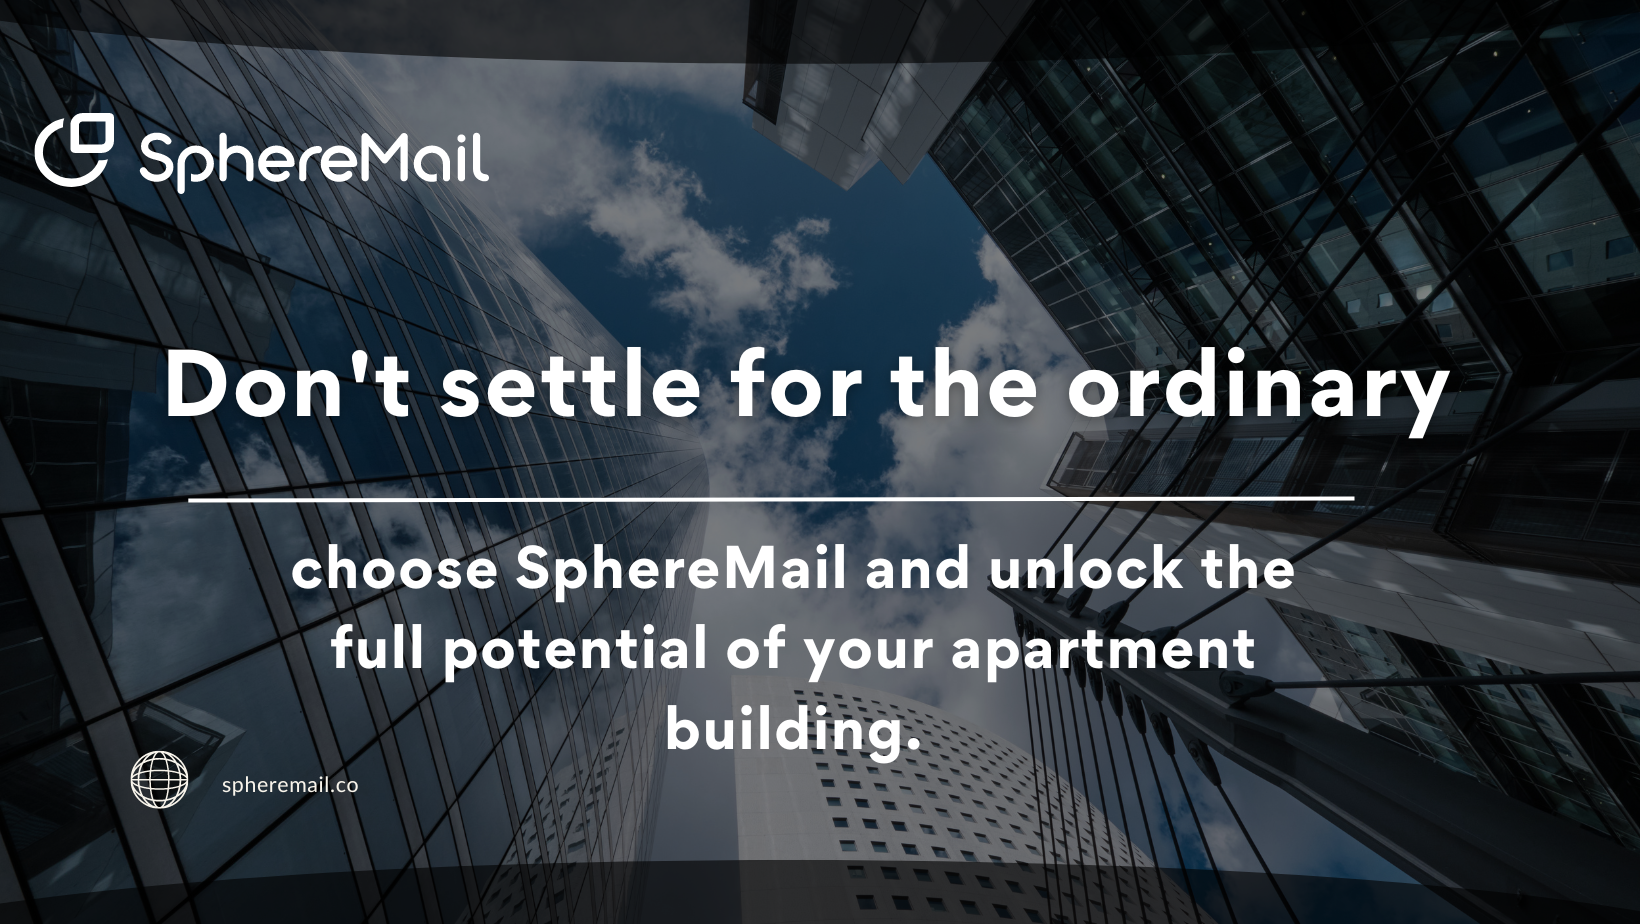 spheremail.co (2)